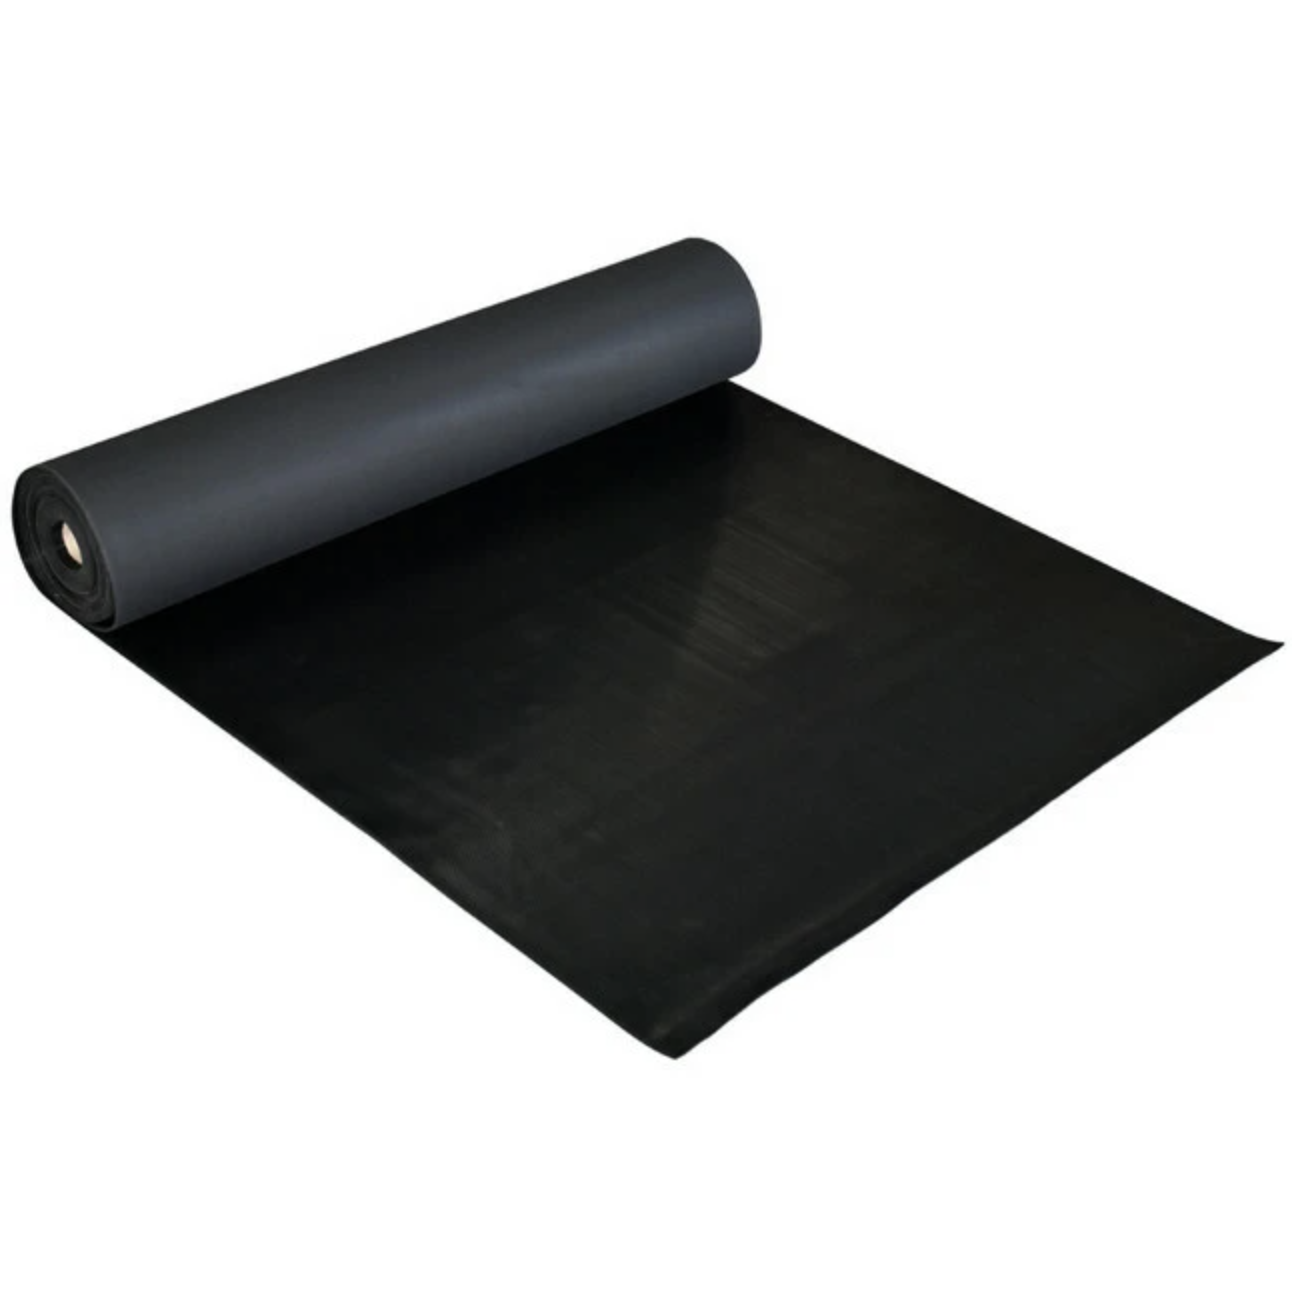 Rubber Sheets & Rolls